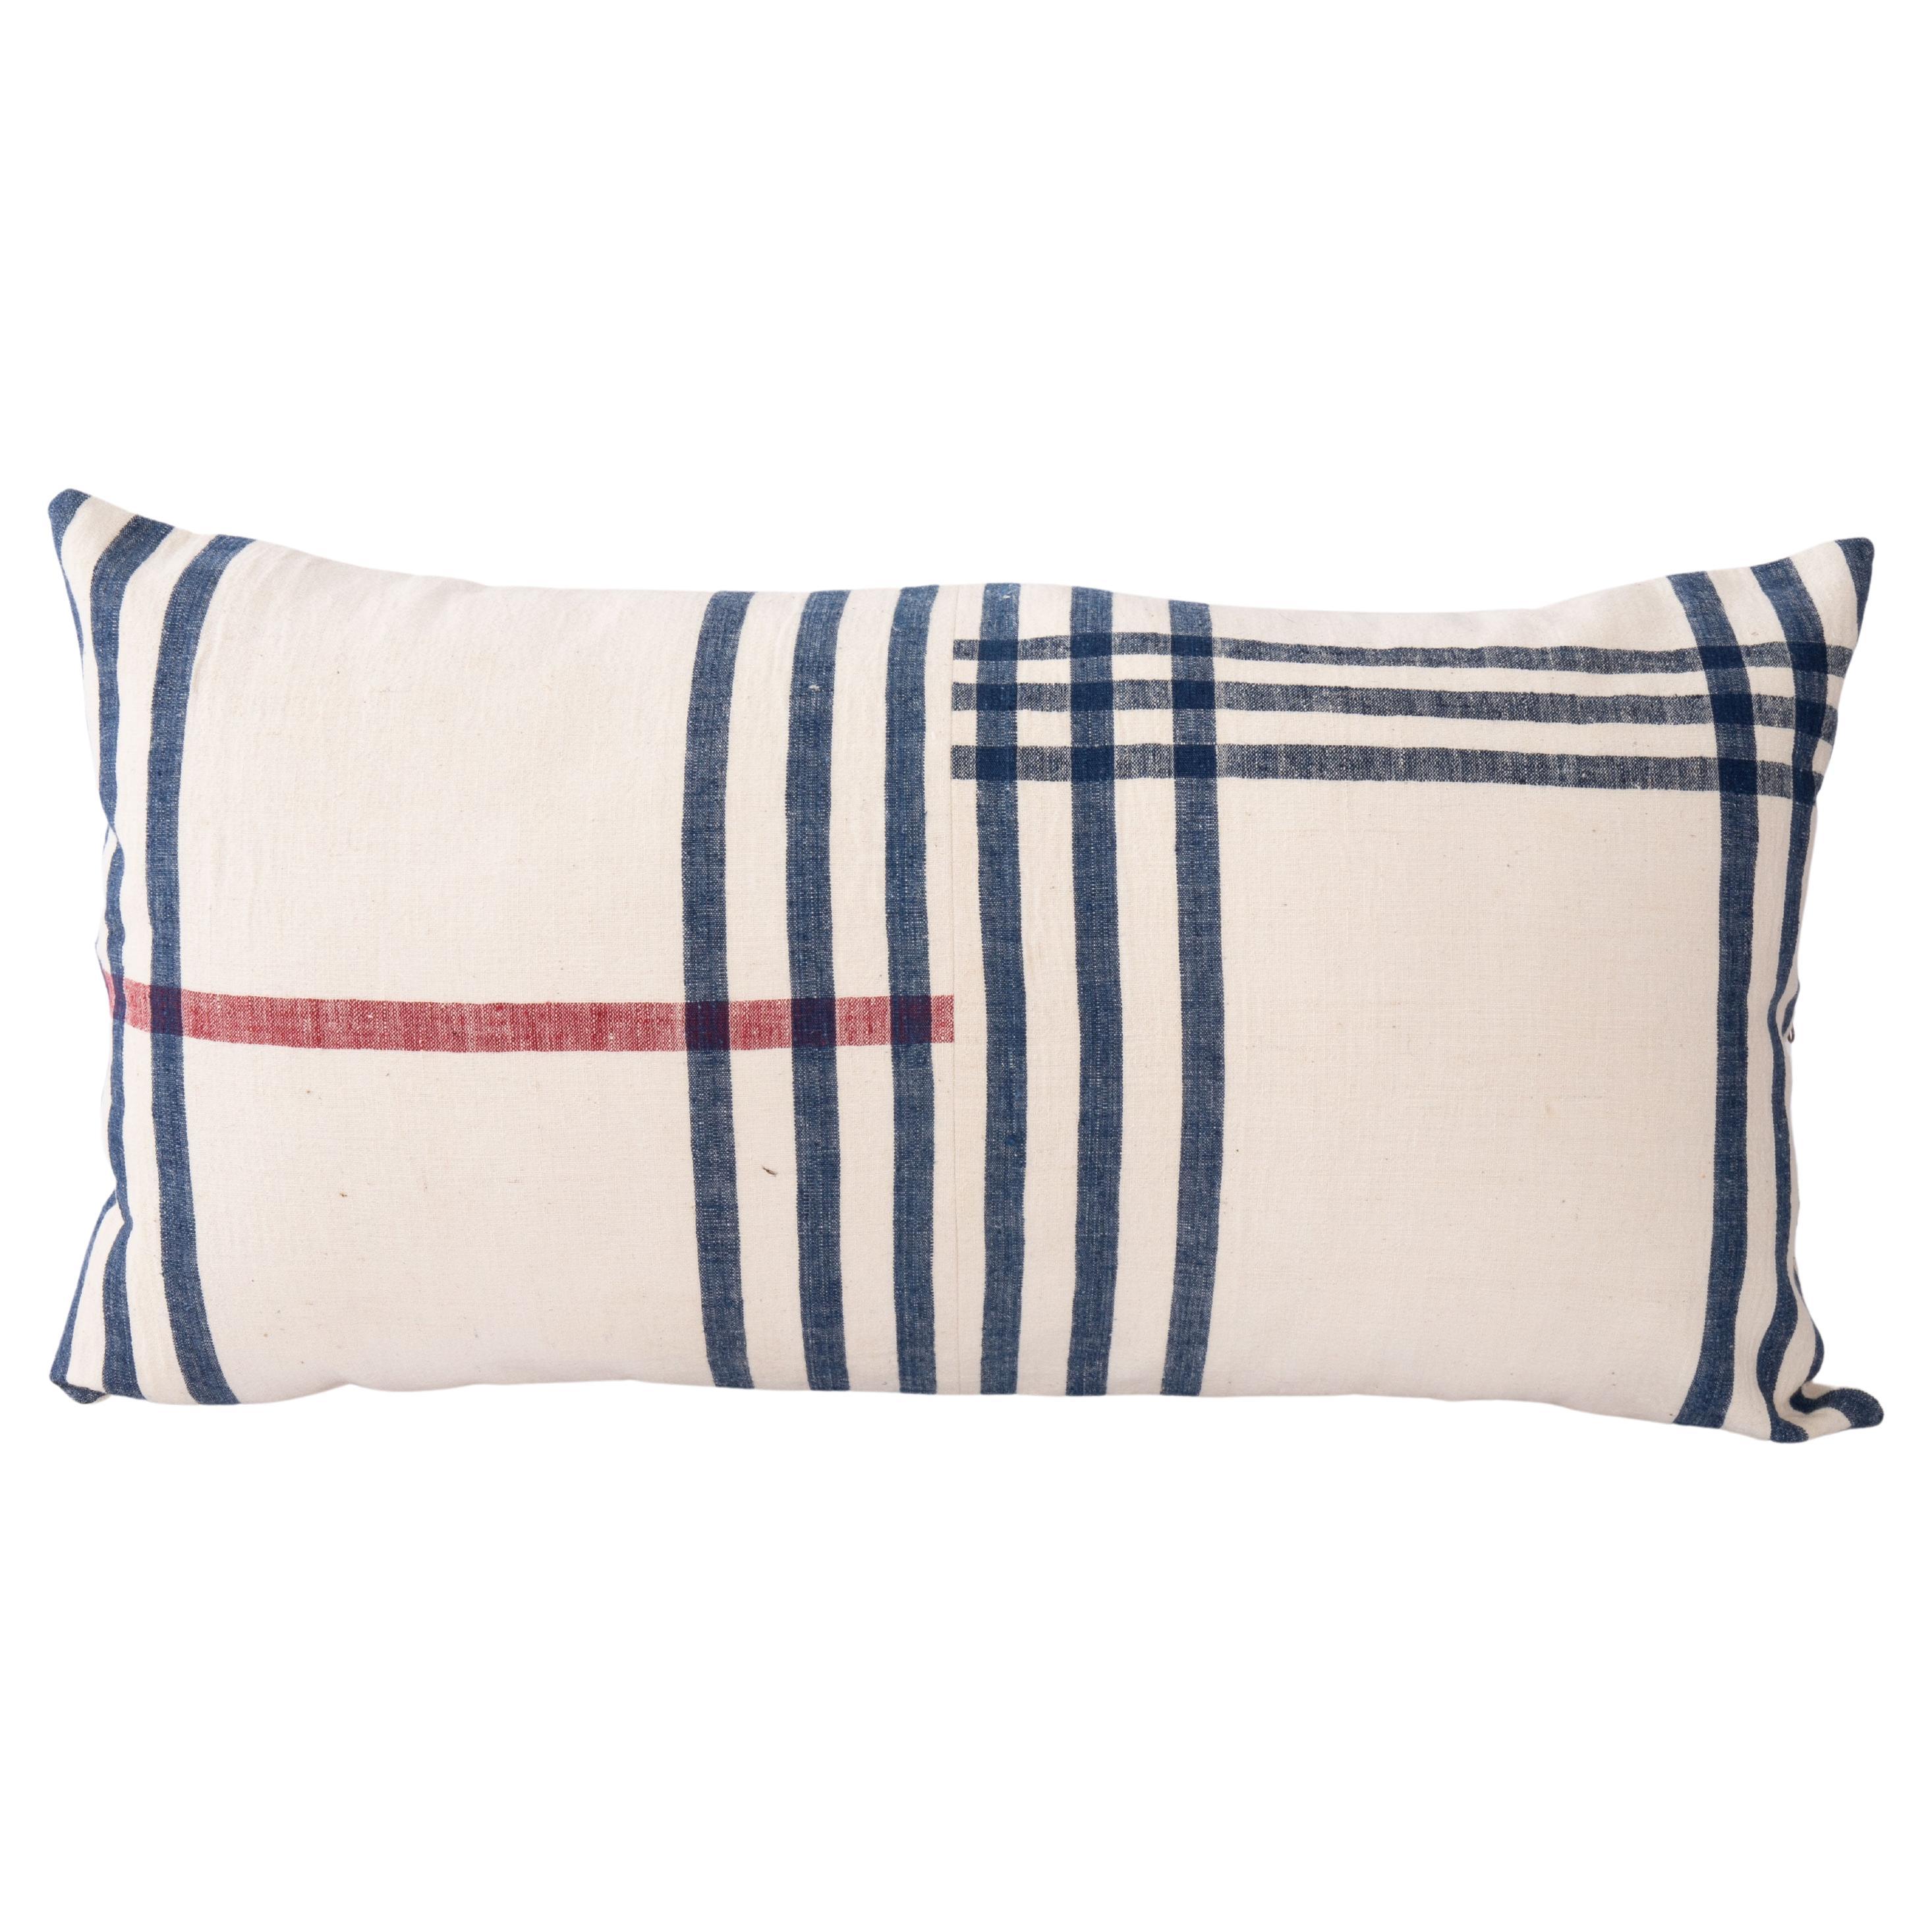 Lumbar Pillow Cover Made from a Vintage Anatolian Cotton Weaving, Mid 20th C. For Sale